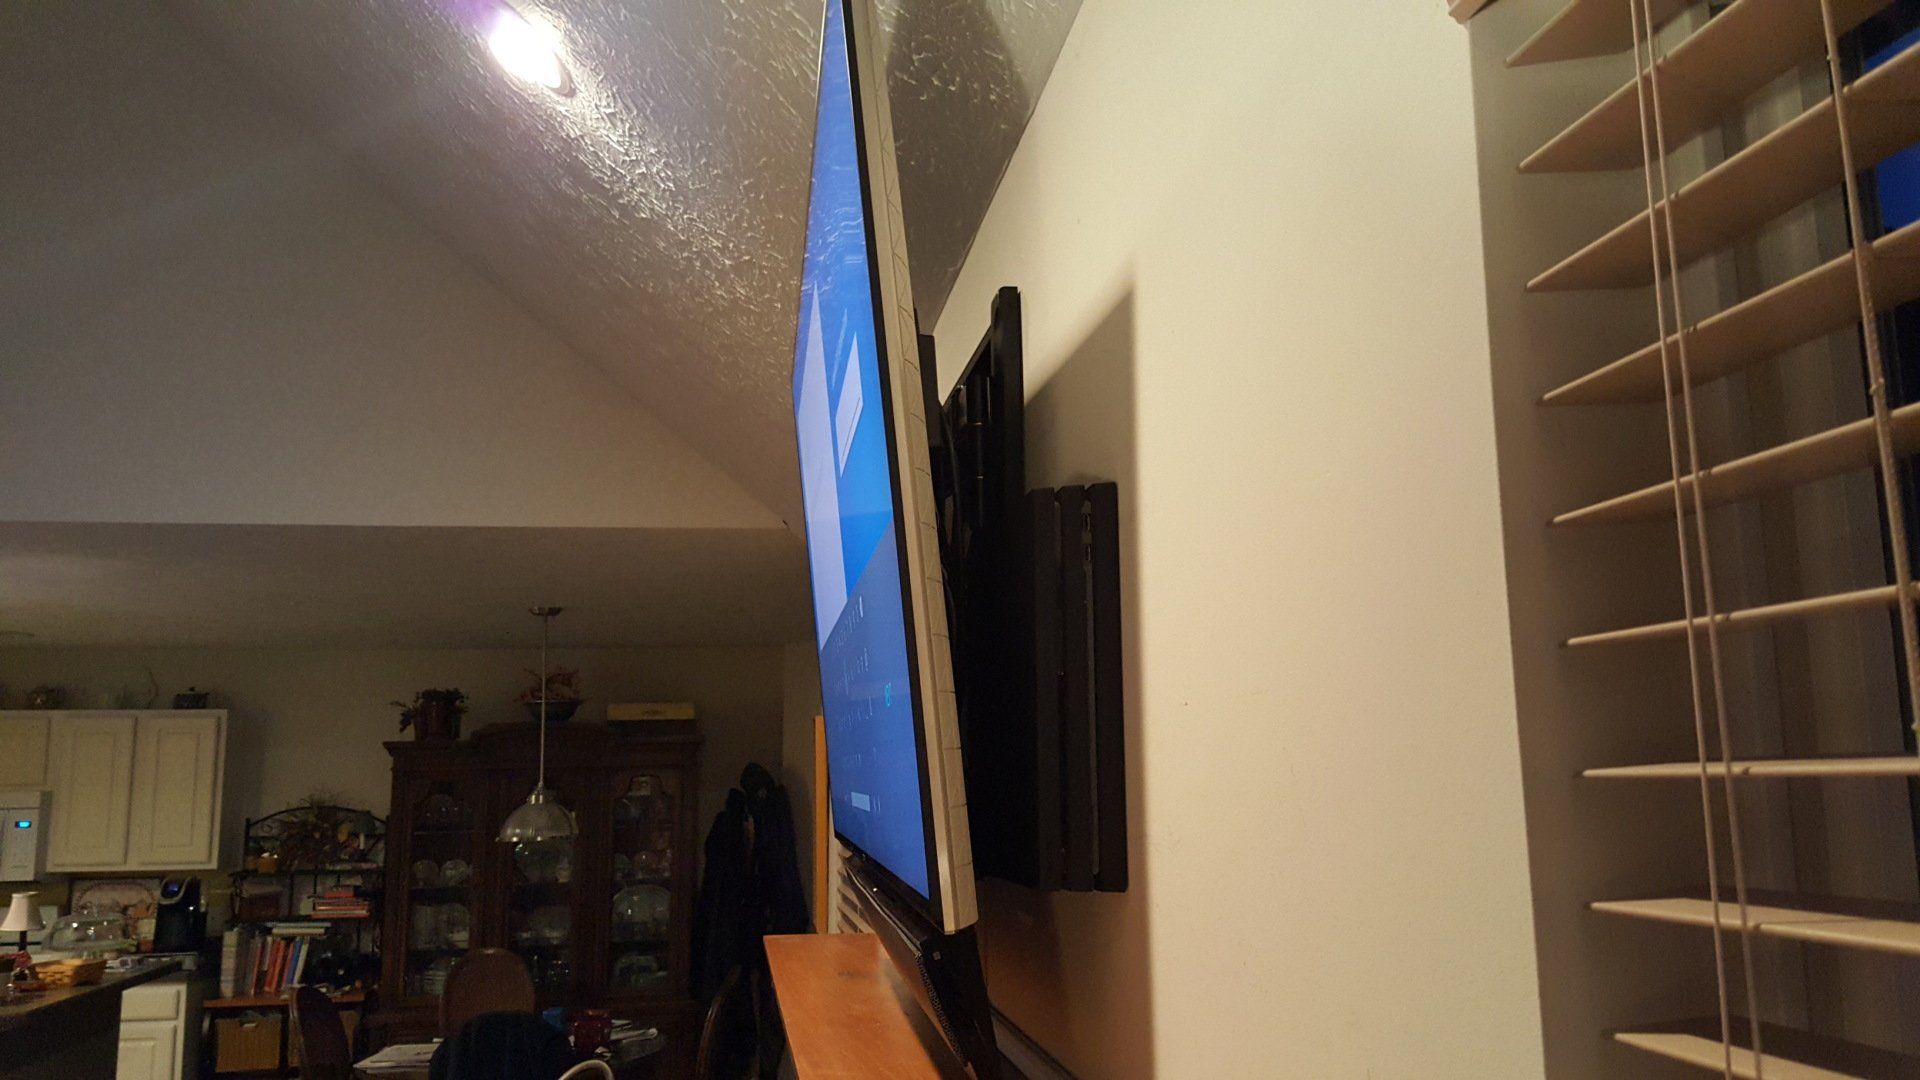 a flat screen tv is mounted on a wall in a living room with a game system mounted behind the TV in northern ohio